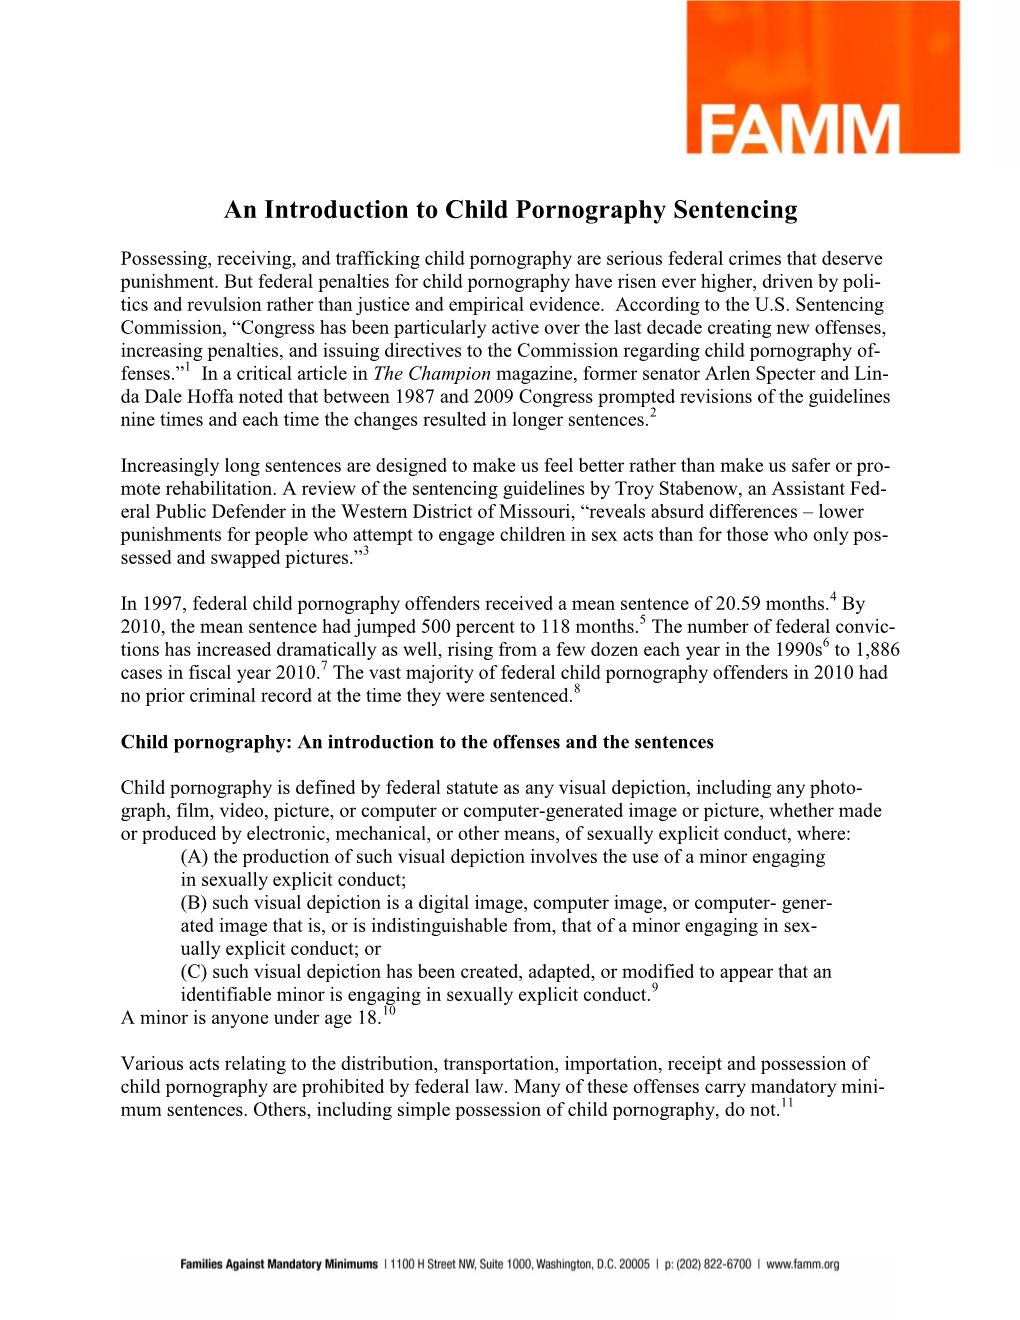 An Introduction to Child Pornography Sentencing